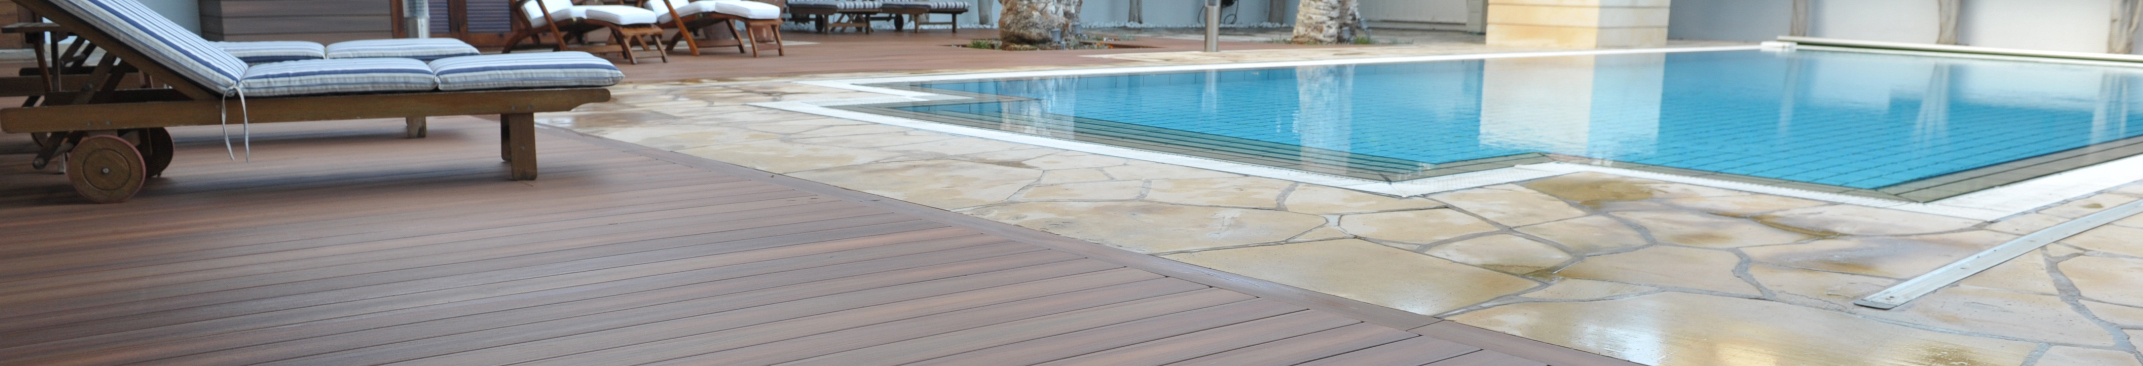 Bunnings Decking or a Specialist Decking Company? What’s the Difference?